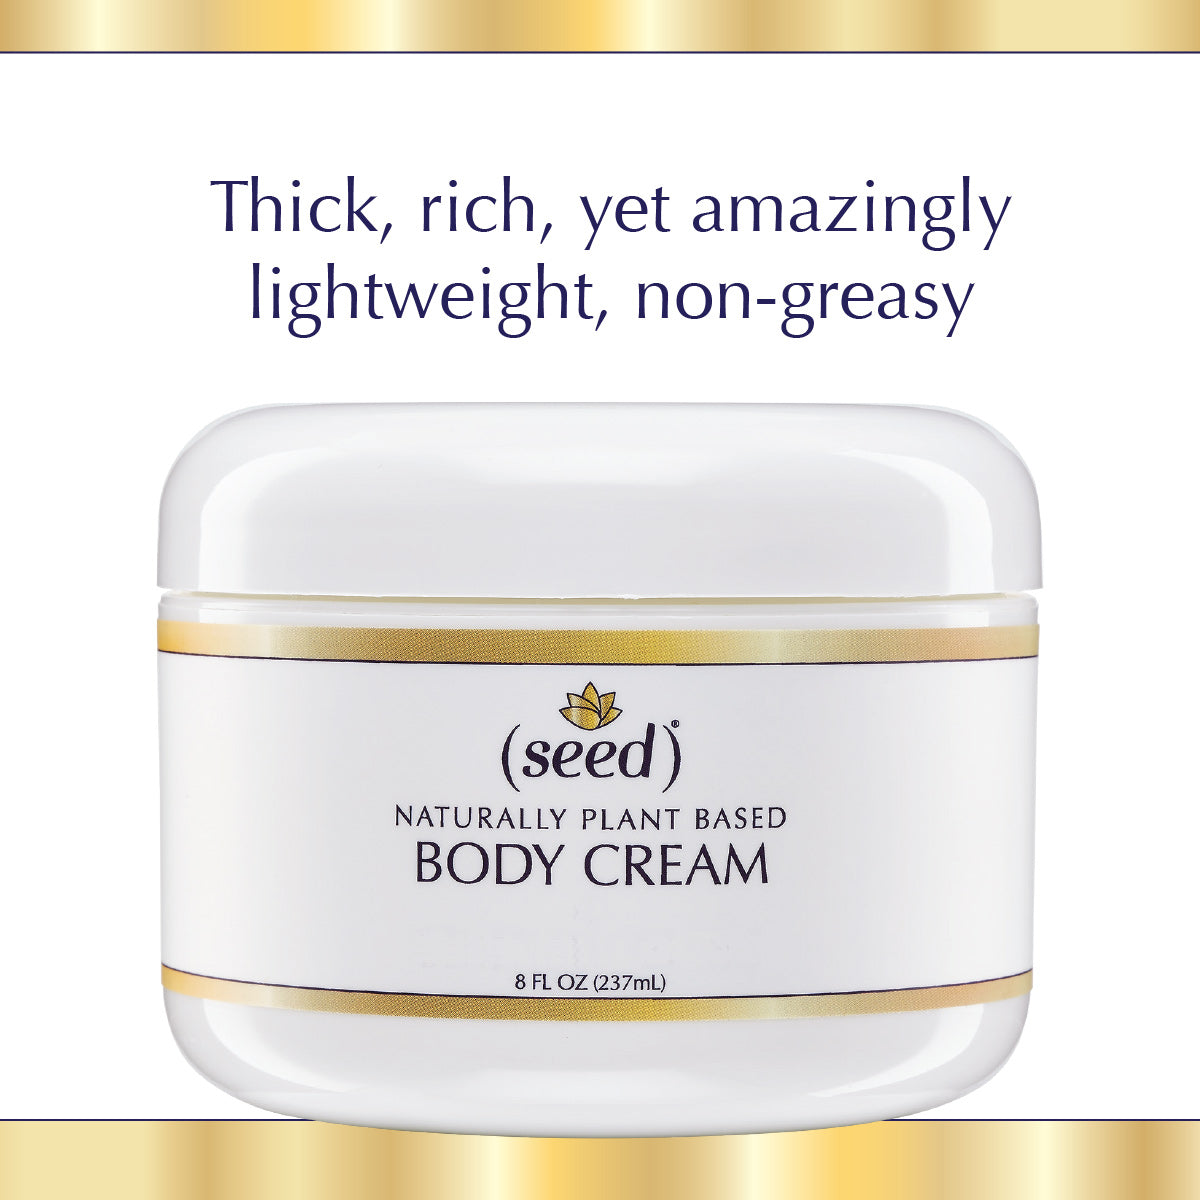 Seed Body Cream is thick rich, yet amazingly lightweight and non-greasy